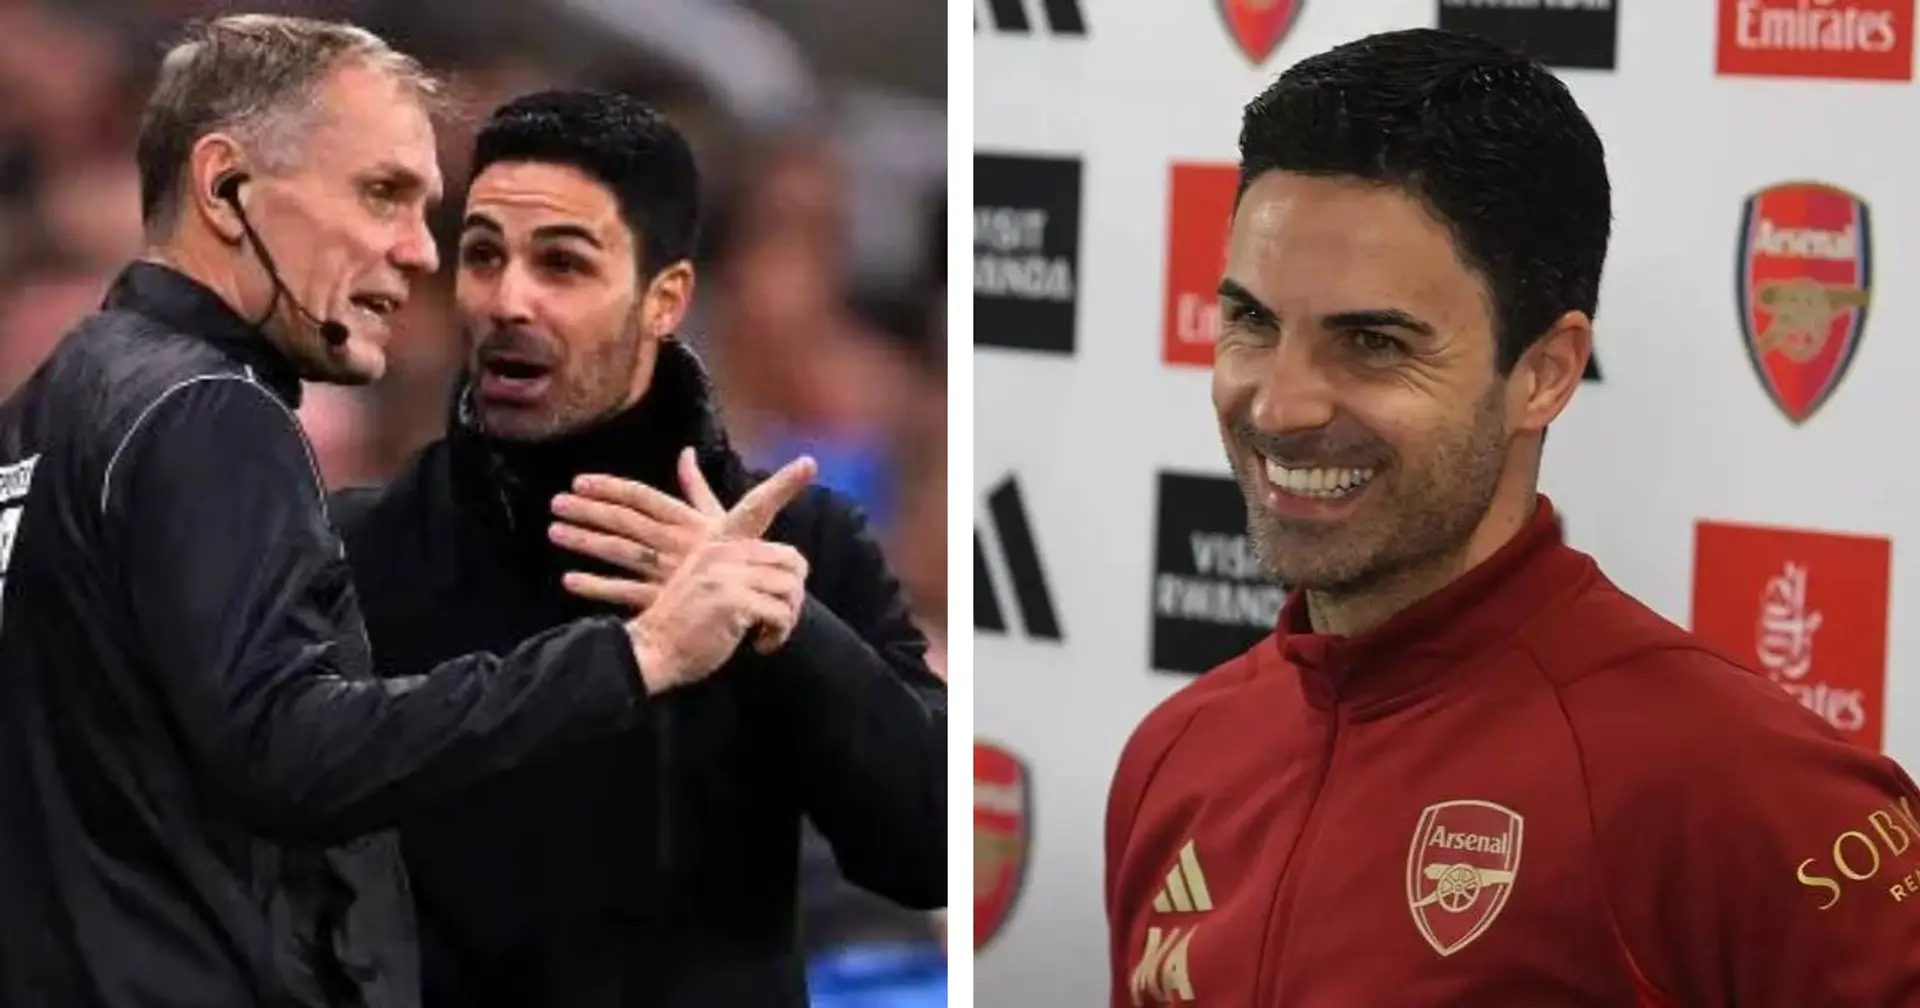 'I said what I felt': Arteta has no regrets over losing cool in controversial 1-0 loss to Newcastle